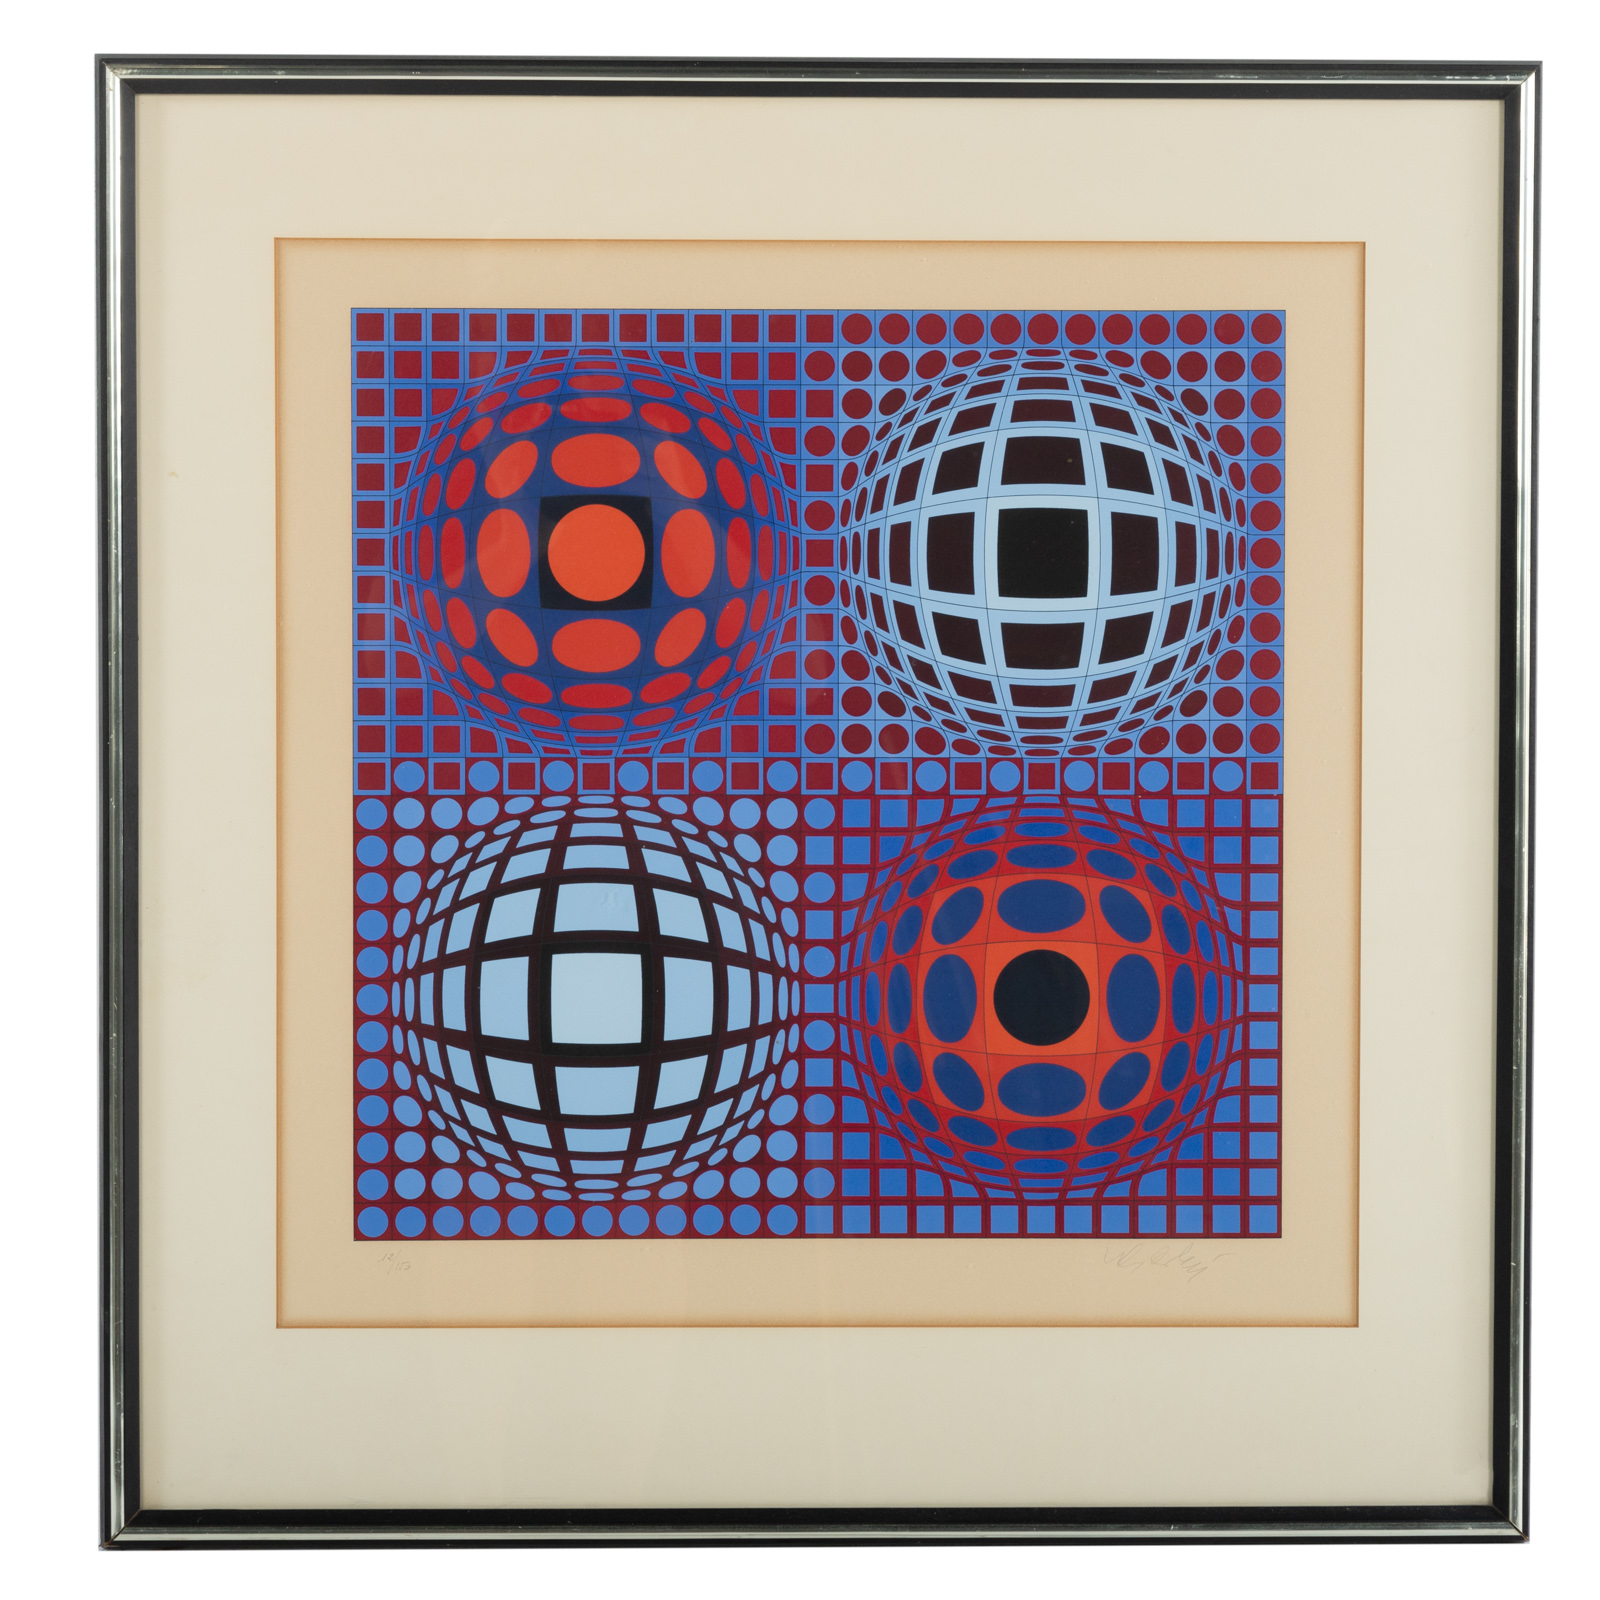 VICTOR VASARELY. ABSTRACT IN RED